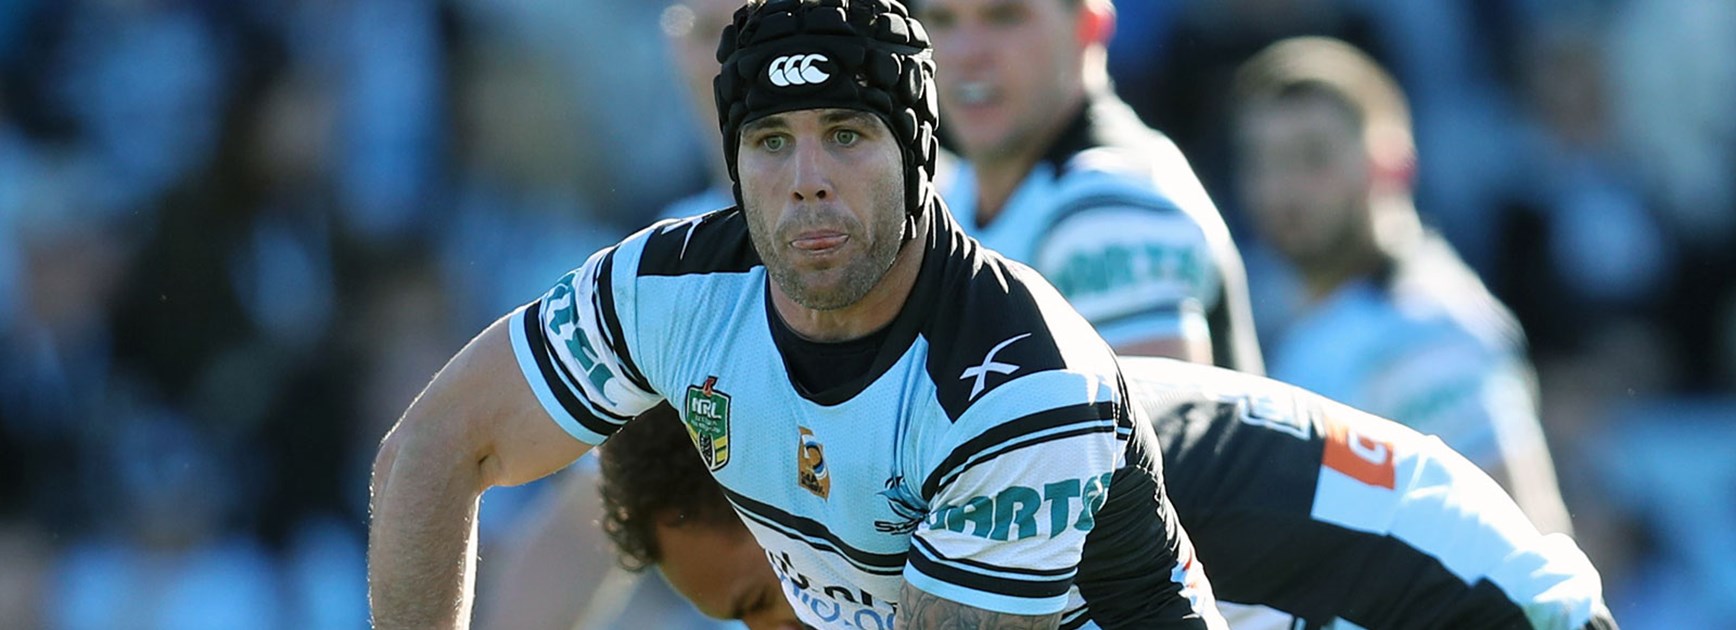 Sharks hooker Michael Ennis during his side's win over the Knights in Round 20.